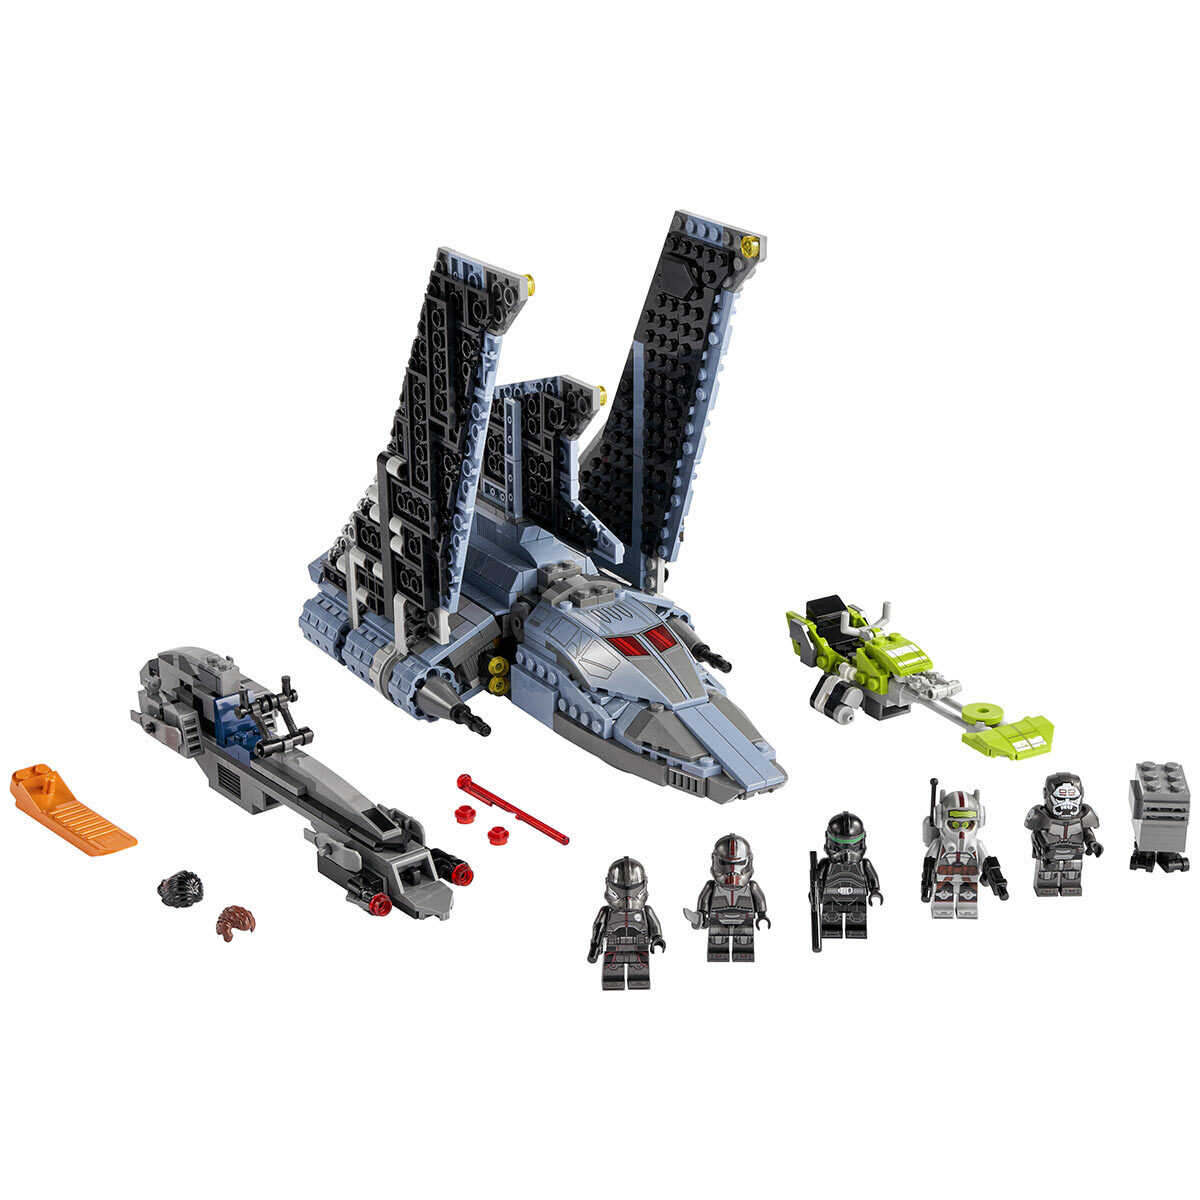 Buy LEGO Star Wars The Bad Batch Attack Shuttle Overview Image at Costco.co.uk